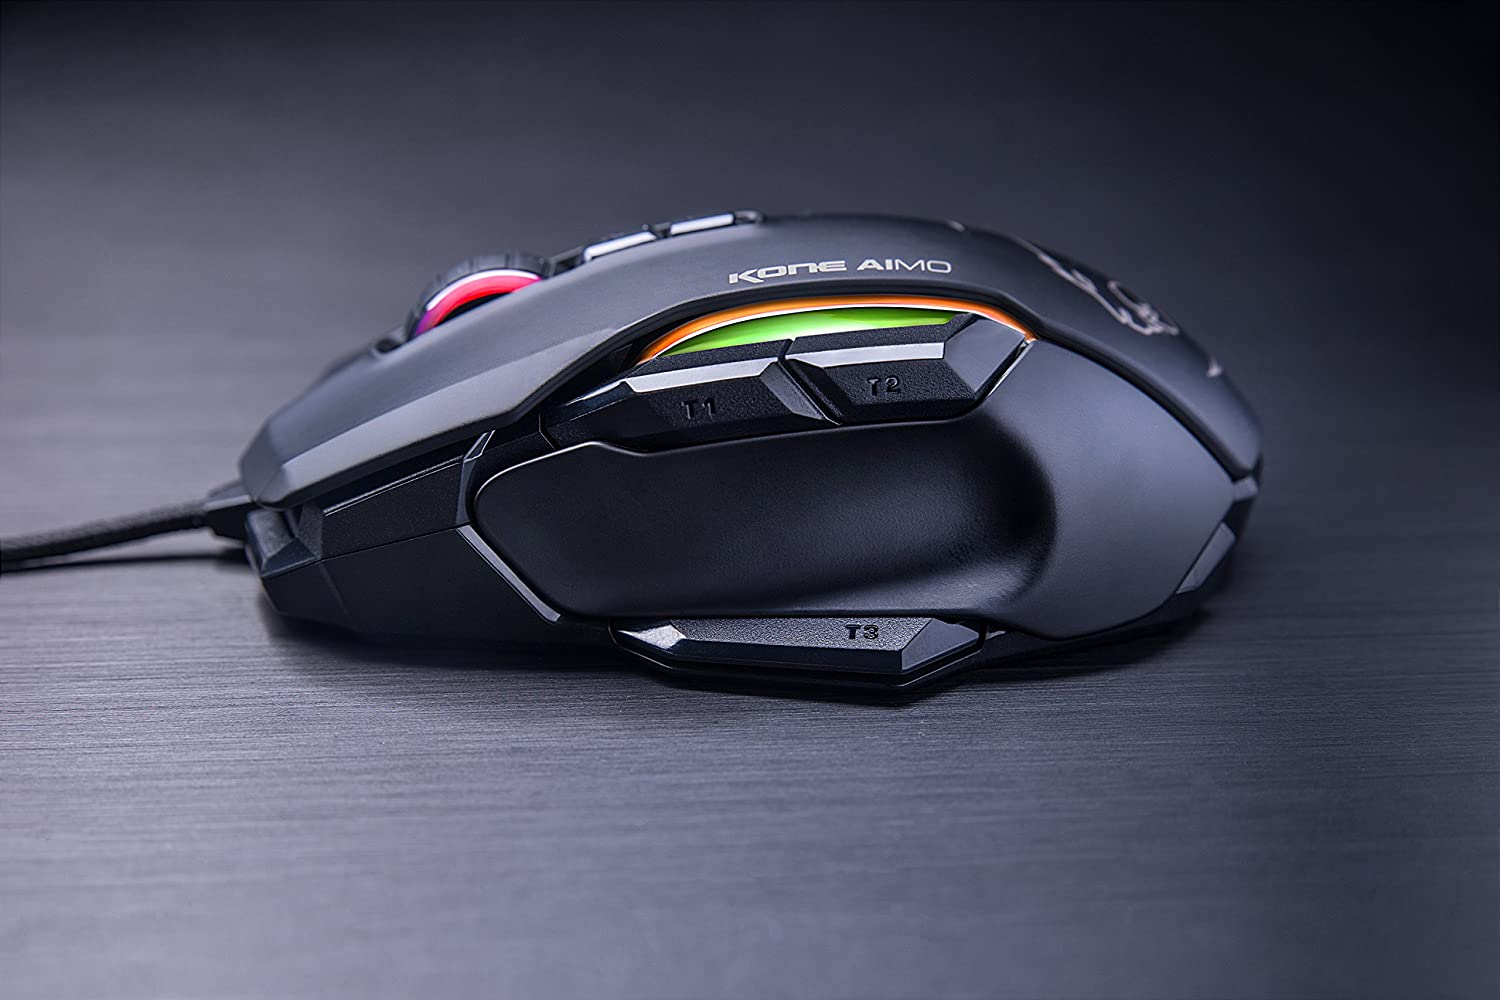 Tt76I7D6 Roccat Https://Youtu.be/Mfk3Bmiiu8C Roccat® Swarm Powered – Comprehensive Driver Suite With A Striking Design And A Stunning Feature Set, The Kone Aimo Channels The Legacy Of Its Predecessor. It Boasts Refined Ergonomics With Enhanced Button Distinction, But What Truly Sets It Apart Is Its Rgba Double Lightguides Powered By The State-Of-The-Art Aimo Intelligent Lighting System. Aimo Is The Vivid Illumination Eco-System From Roccat®. Its Functionality Grows Exponentially Based On The Number Of Aimo-Enabled Devices Connected. It Also Reacts Intuitively And Organically To Your Computing Behavior. Eliminating The Need For Configuration, It Presents A State-Of-The-Art Lighting Scenario Right Out Of The Box, For A Completely Fluid, Next-Gen Experience. The Kone Aimo Features A Tri-Button Thumb Zone For A New And Even Greater Level Of Control. It Includes Two Wide Buttons Suitable For All Hand Sizes, Plus An Ergonomic Lower Button Set To Easy-Shift[+]™ By Default. Easy-Shift[+]™ Is The World-Famous Button Duplicator Technology That Lets You Assign A Secondary Function To The Mouse'S Buttons. It'S Easy To Program And Has Options For Simple Commands And Complex Macros. Gaming Mouse Roccat - Kone Aimo Rgba Smart Customization Gaming Mouse (Black) 23 Programmable Keys, Designed In Germany